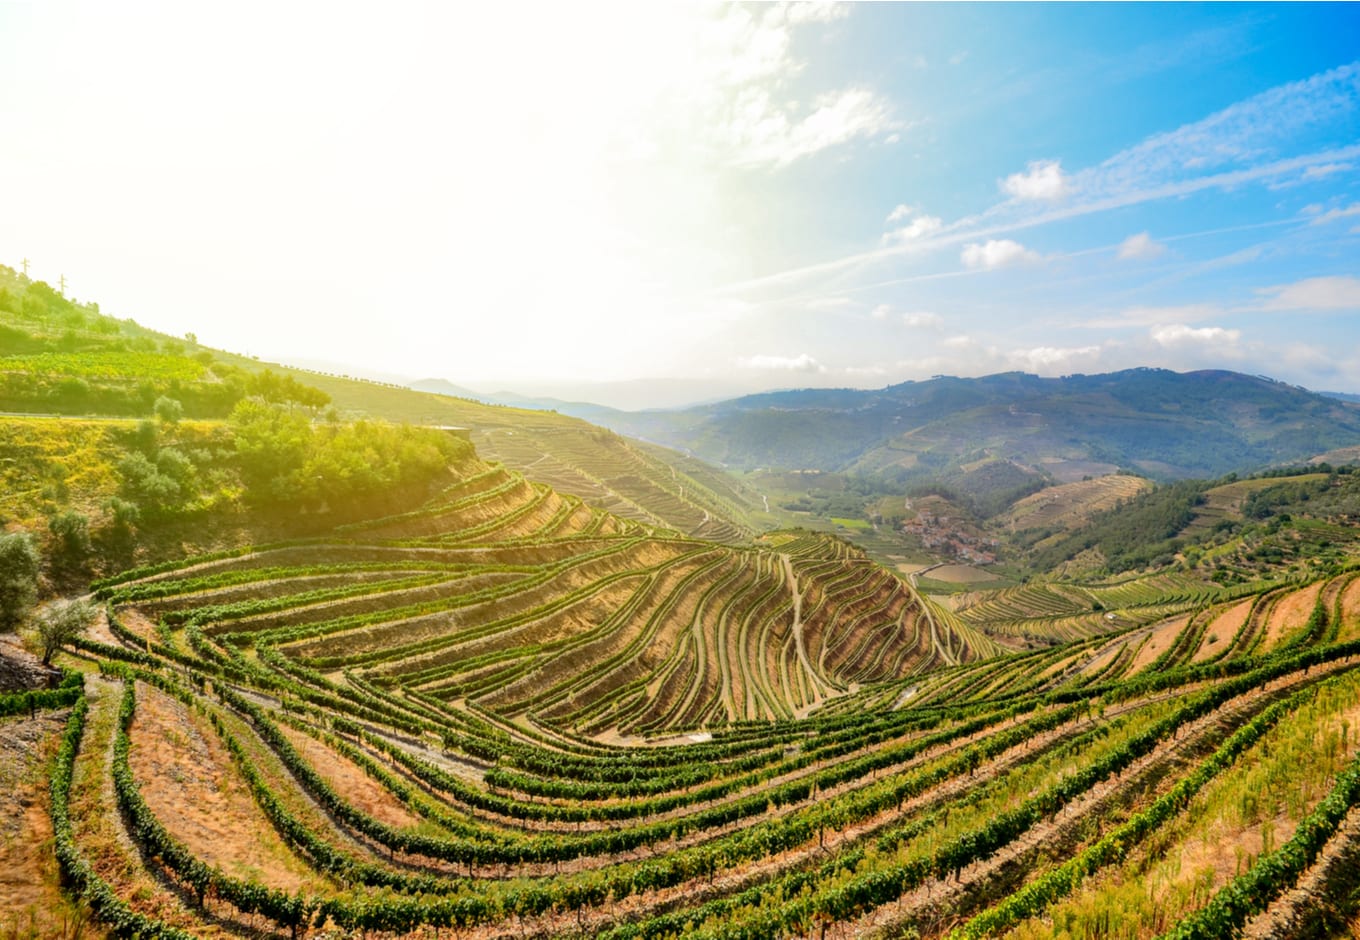 The Douro Valley, a pemium wine growing region in Portugal.